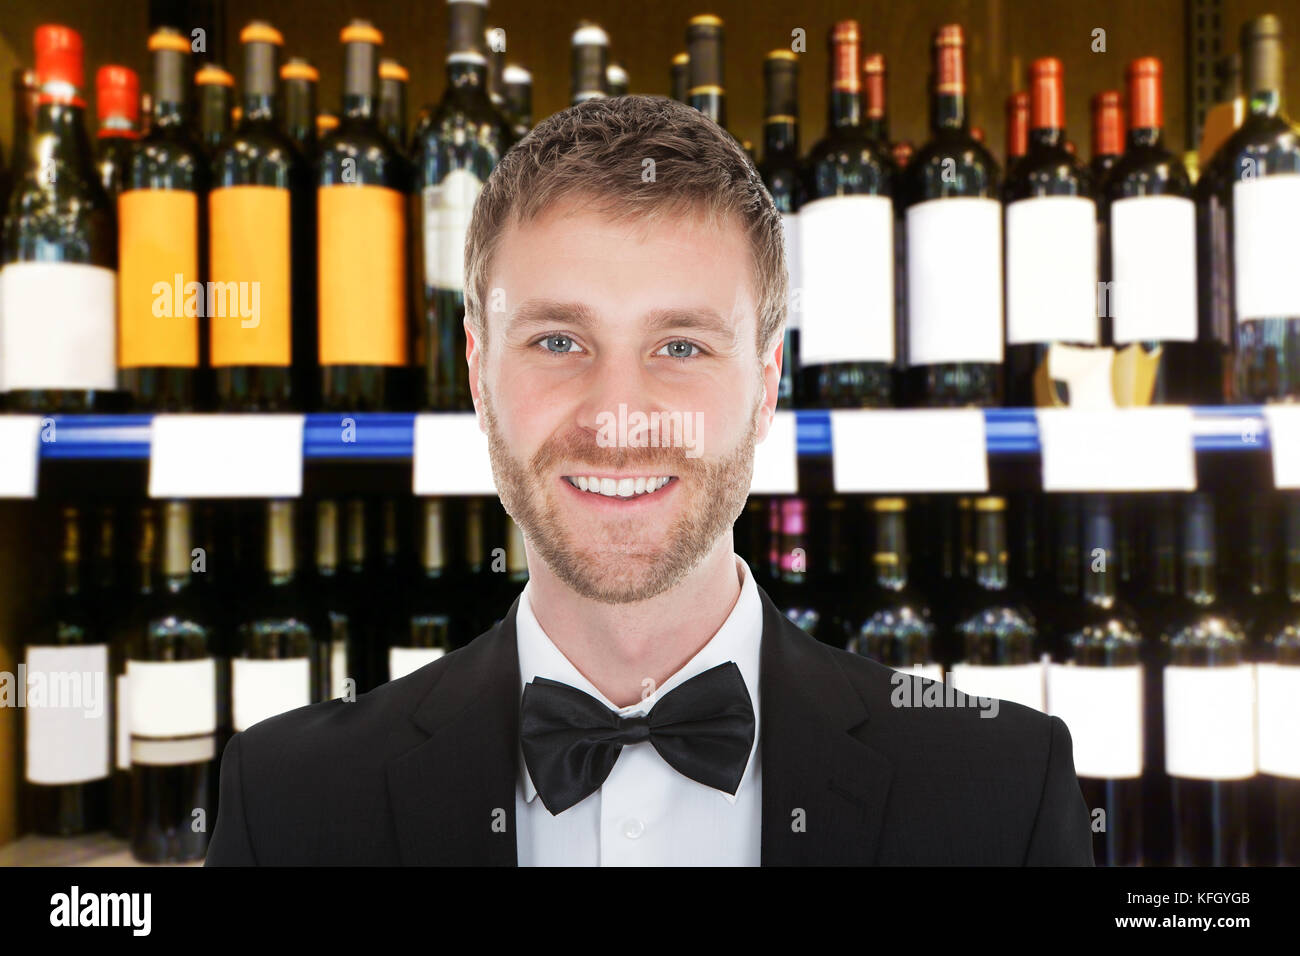 Portrait Of Smiling Male Bartender In Front Of Wine Shelves Stock Photo